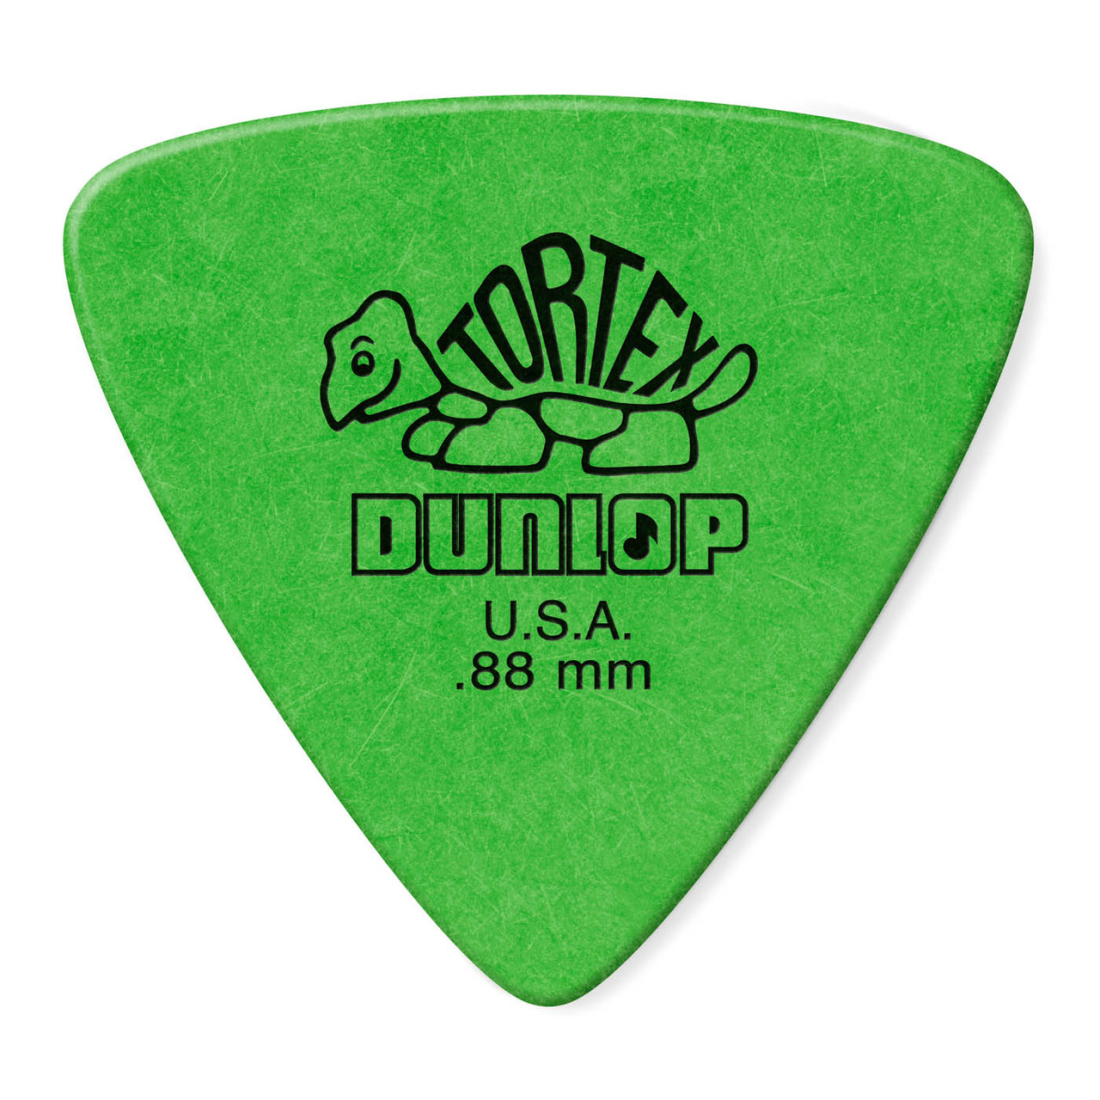 Tortex Triangle Player Pack (72 Pack) - .88mm